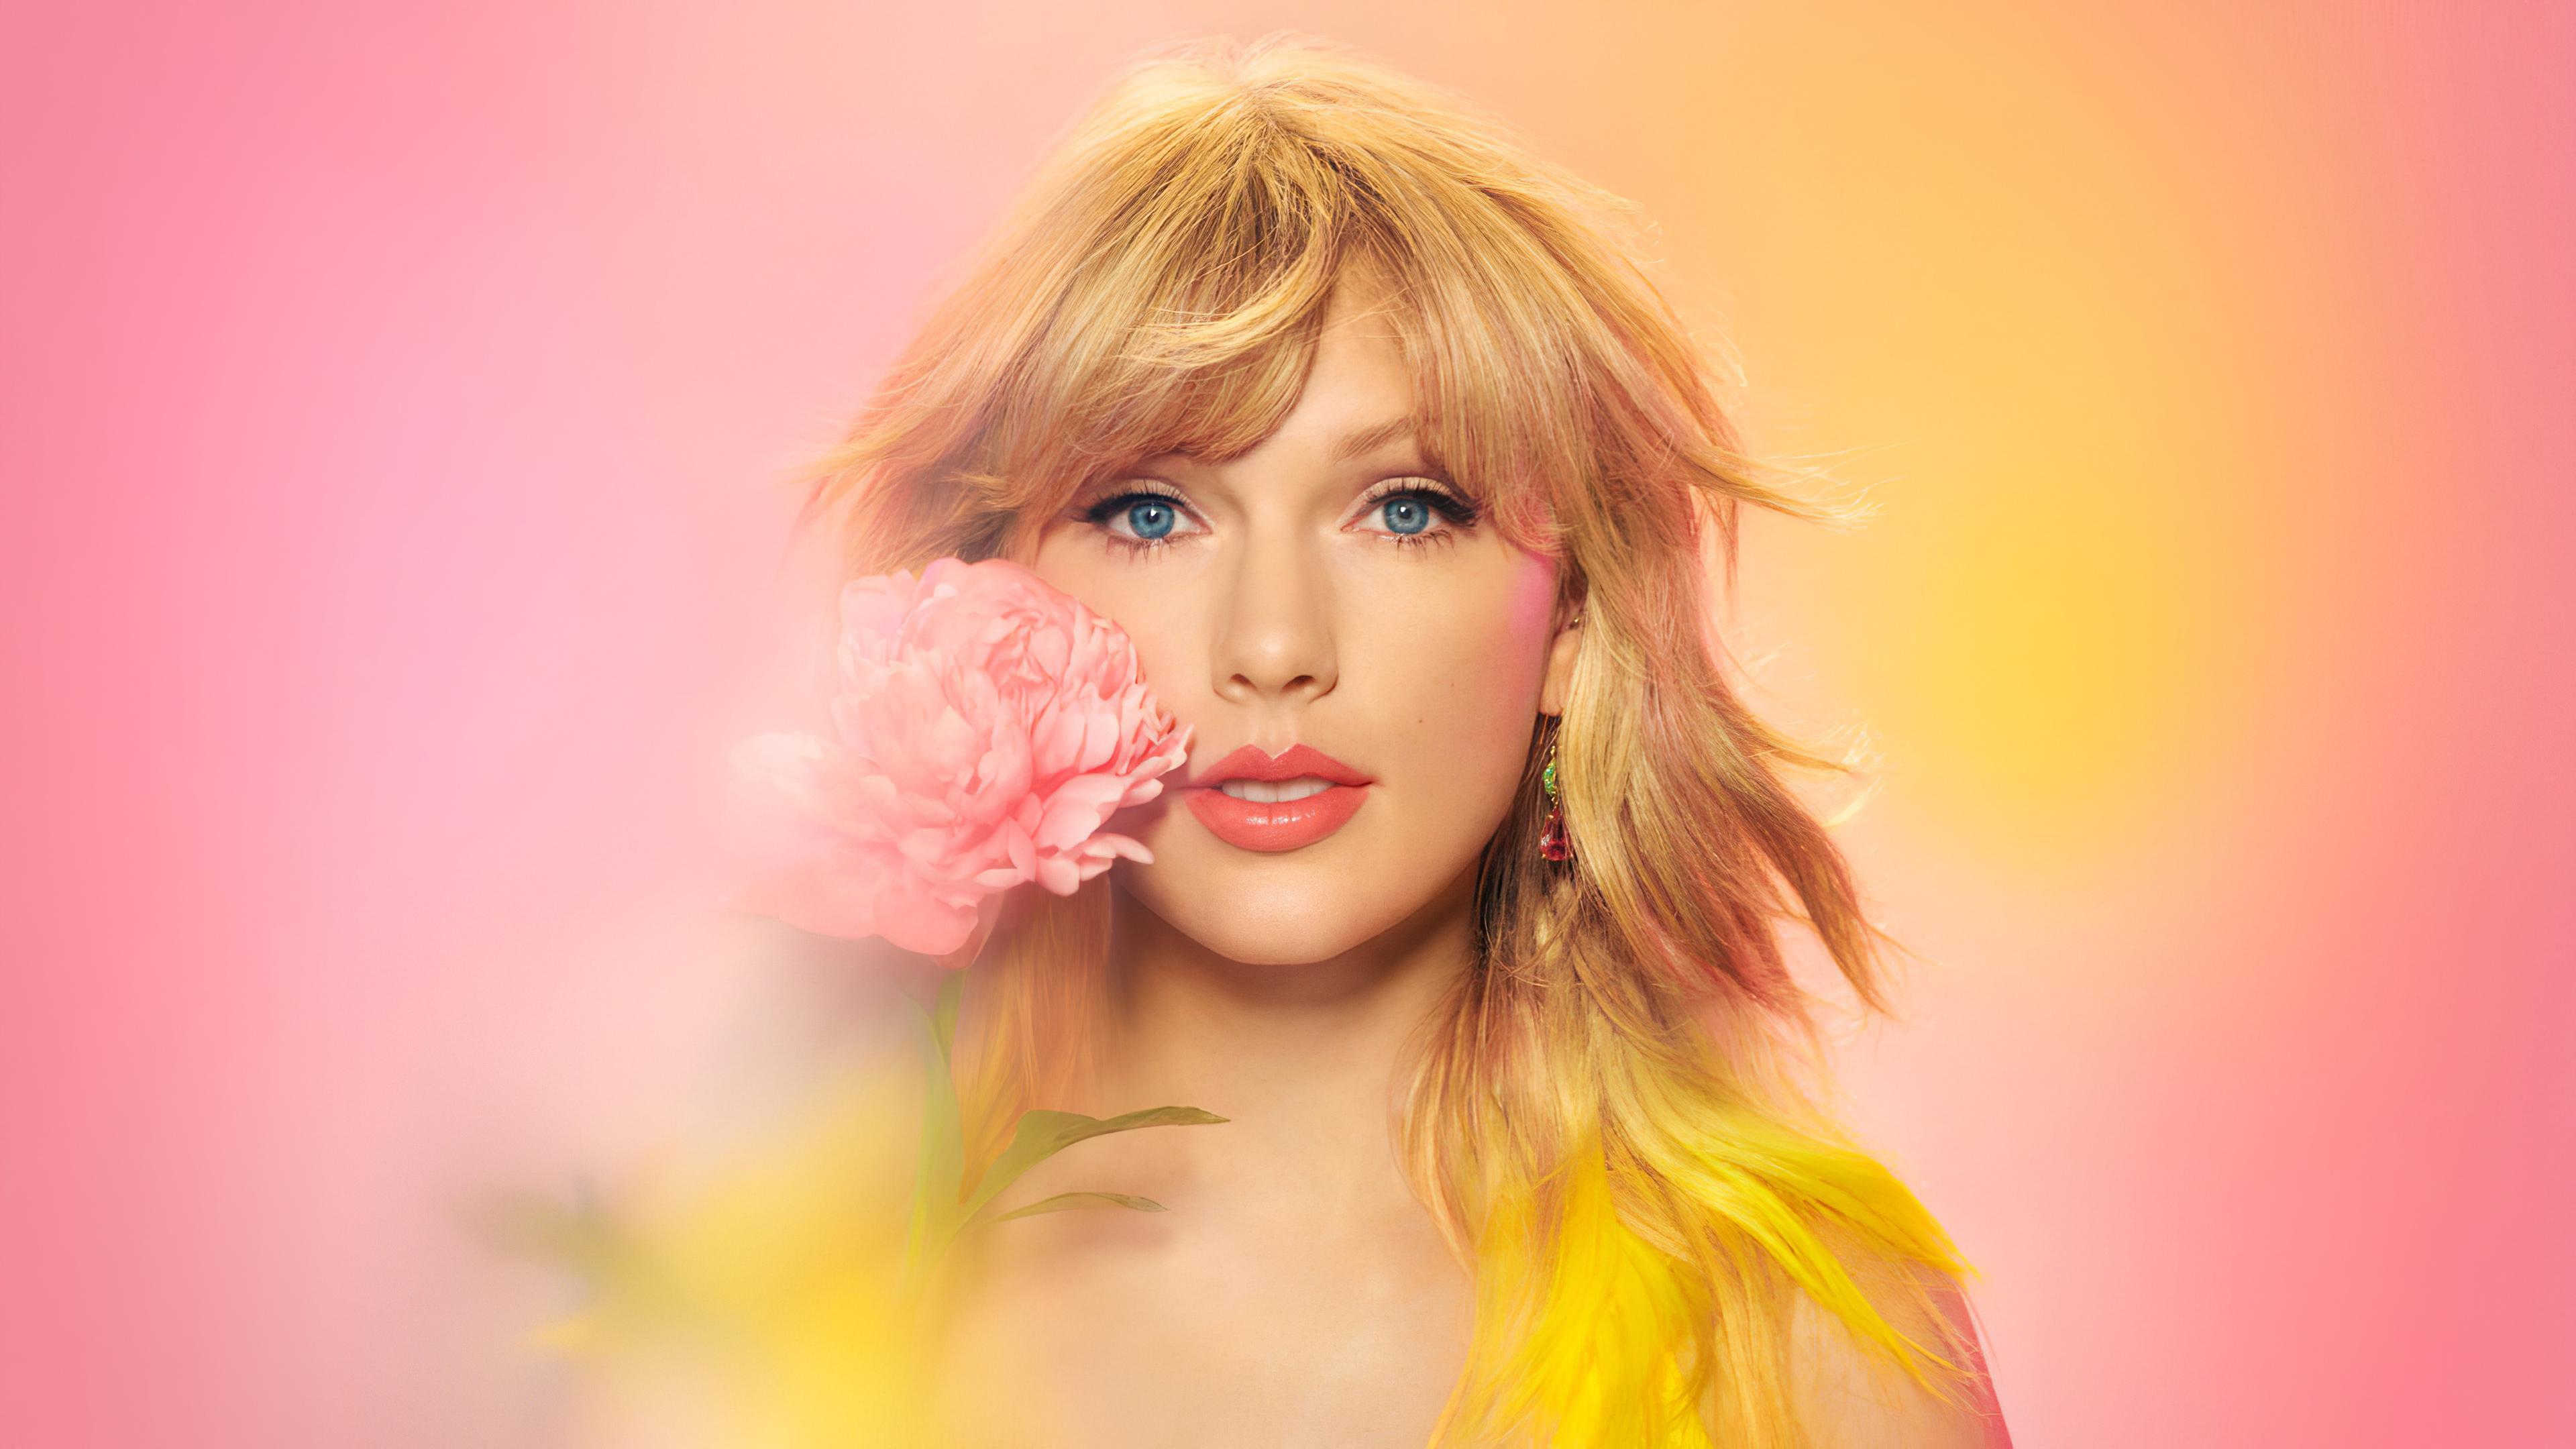 Taylor Swift 2020 Wallpapers Wallpaper Cave